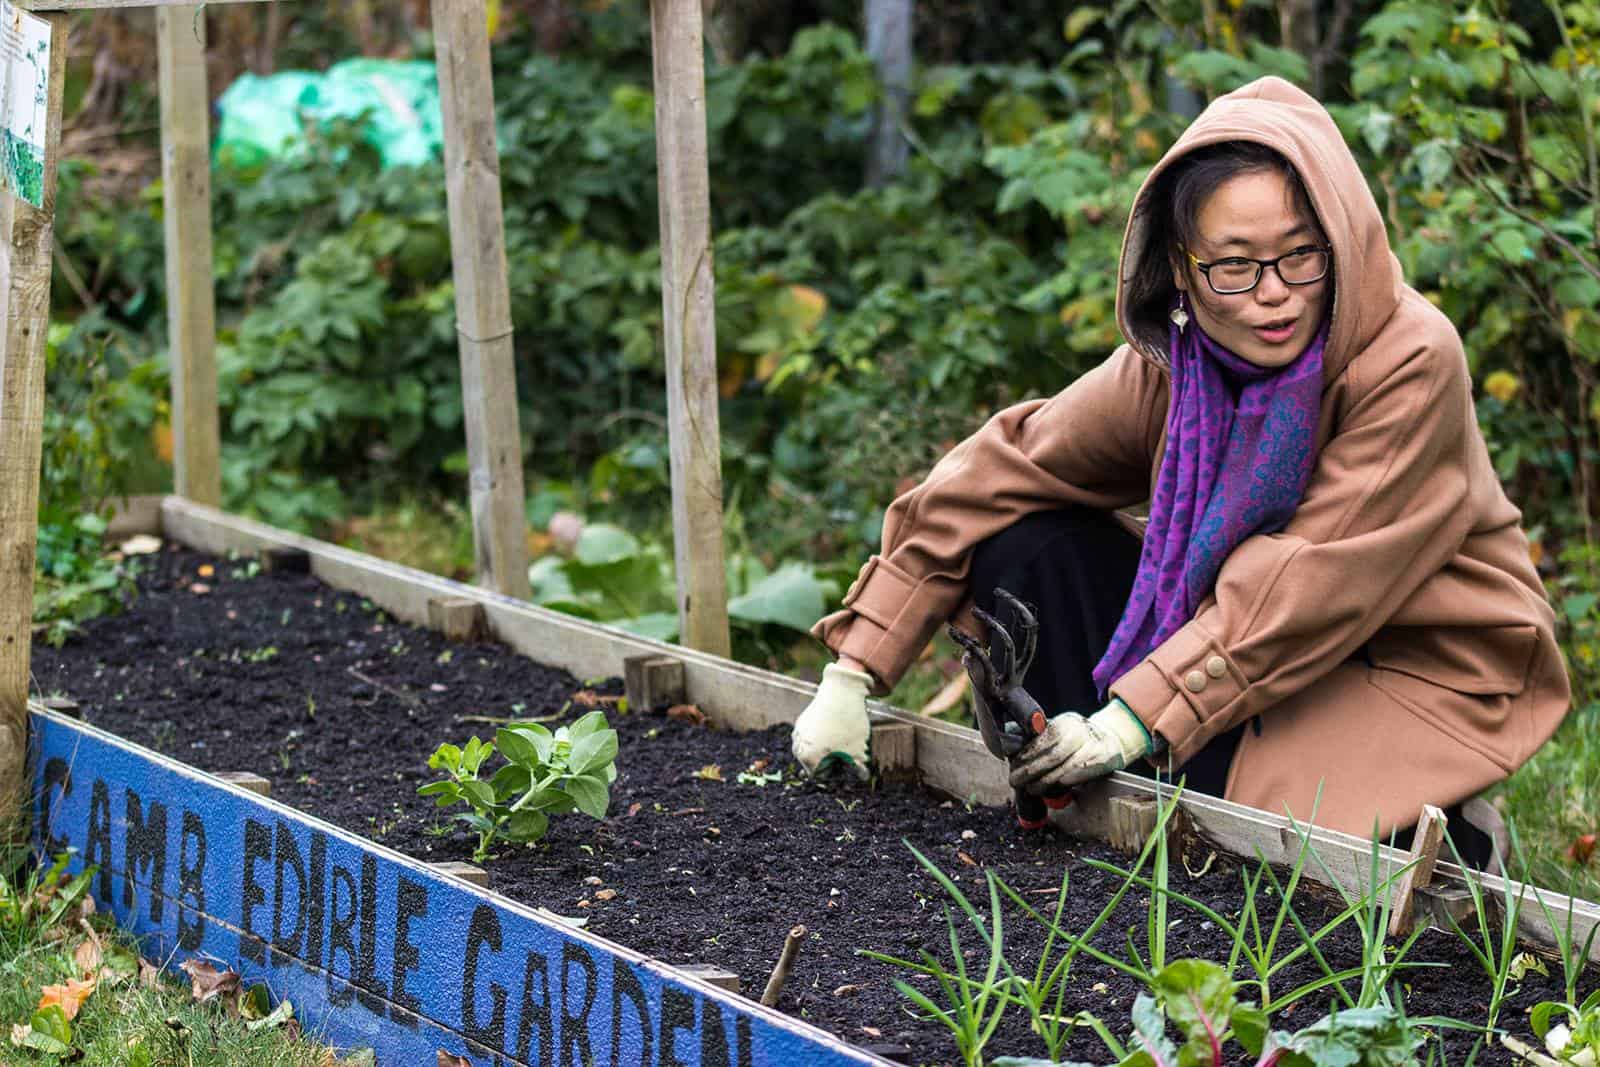 One person wearing a brown hooded coat and purple scarf is gardening in a raised bed.